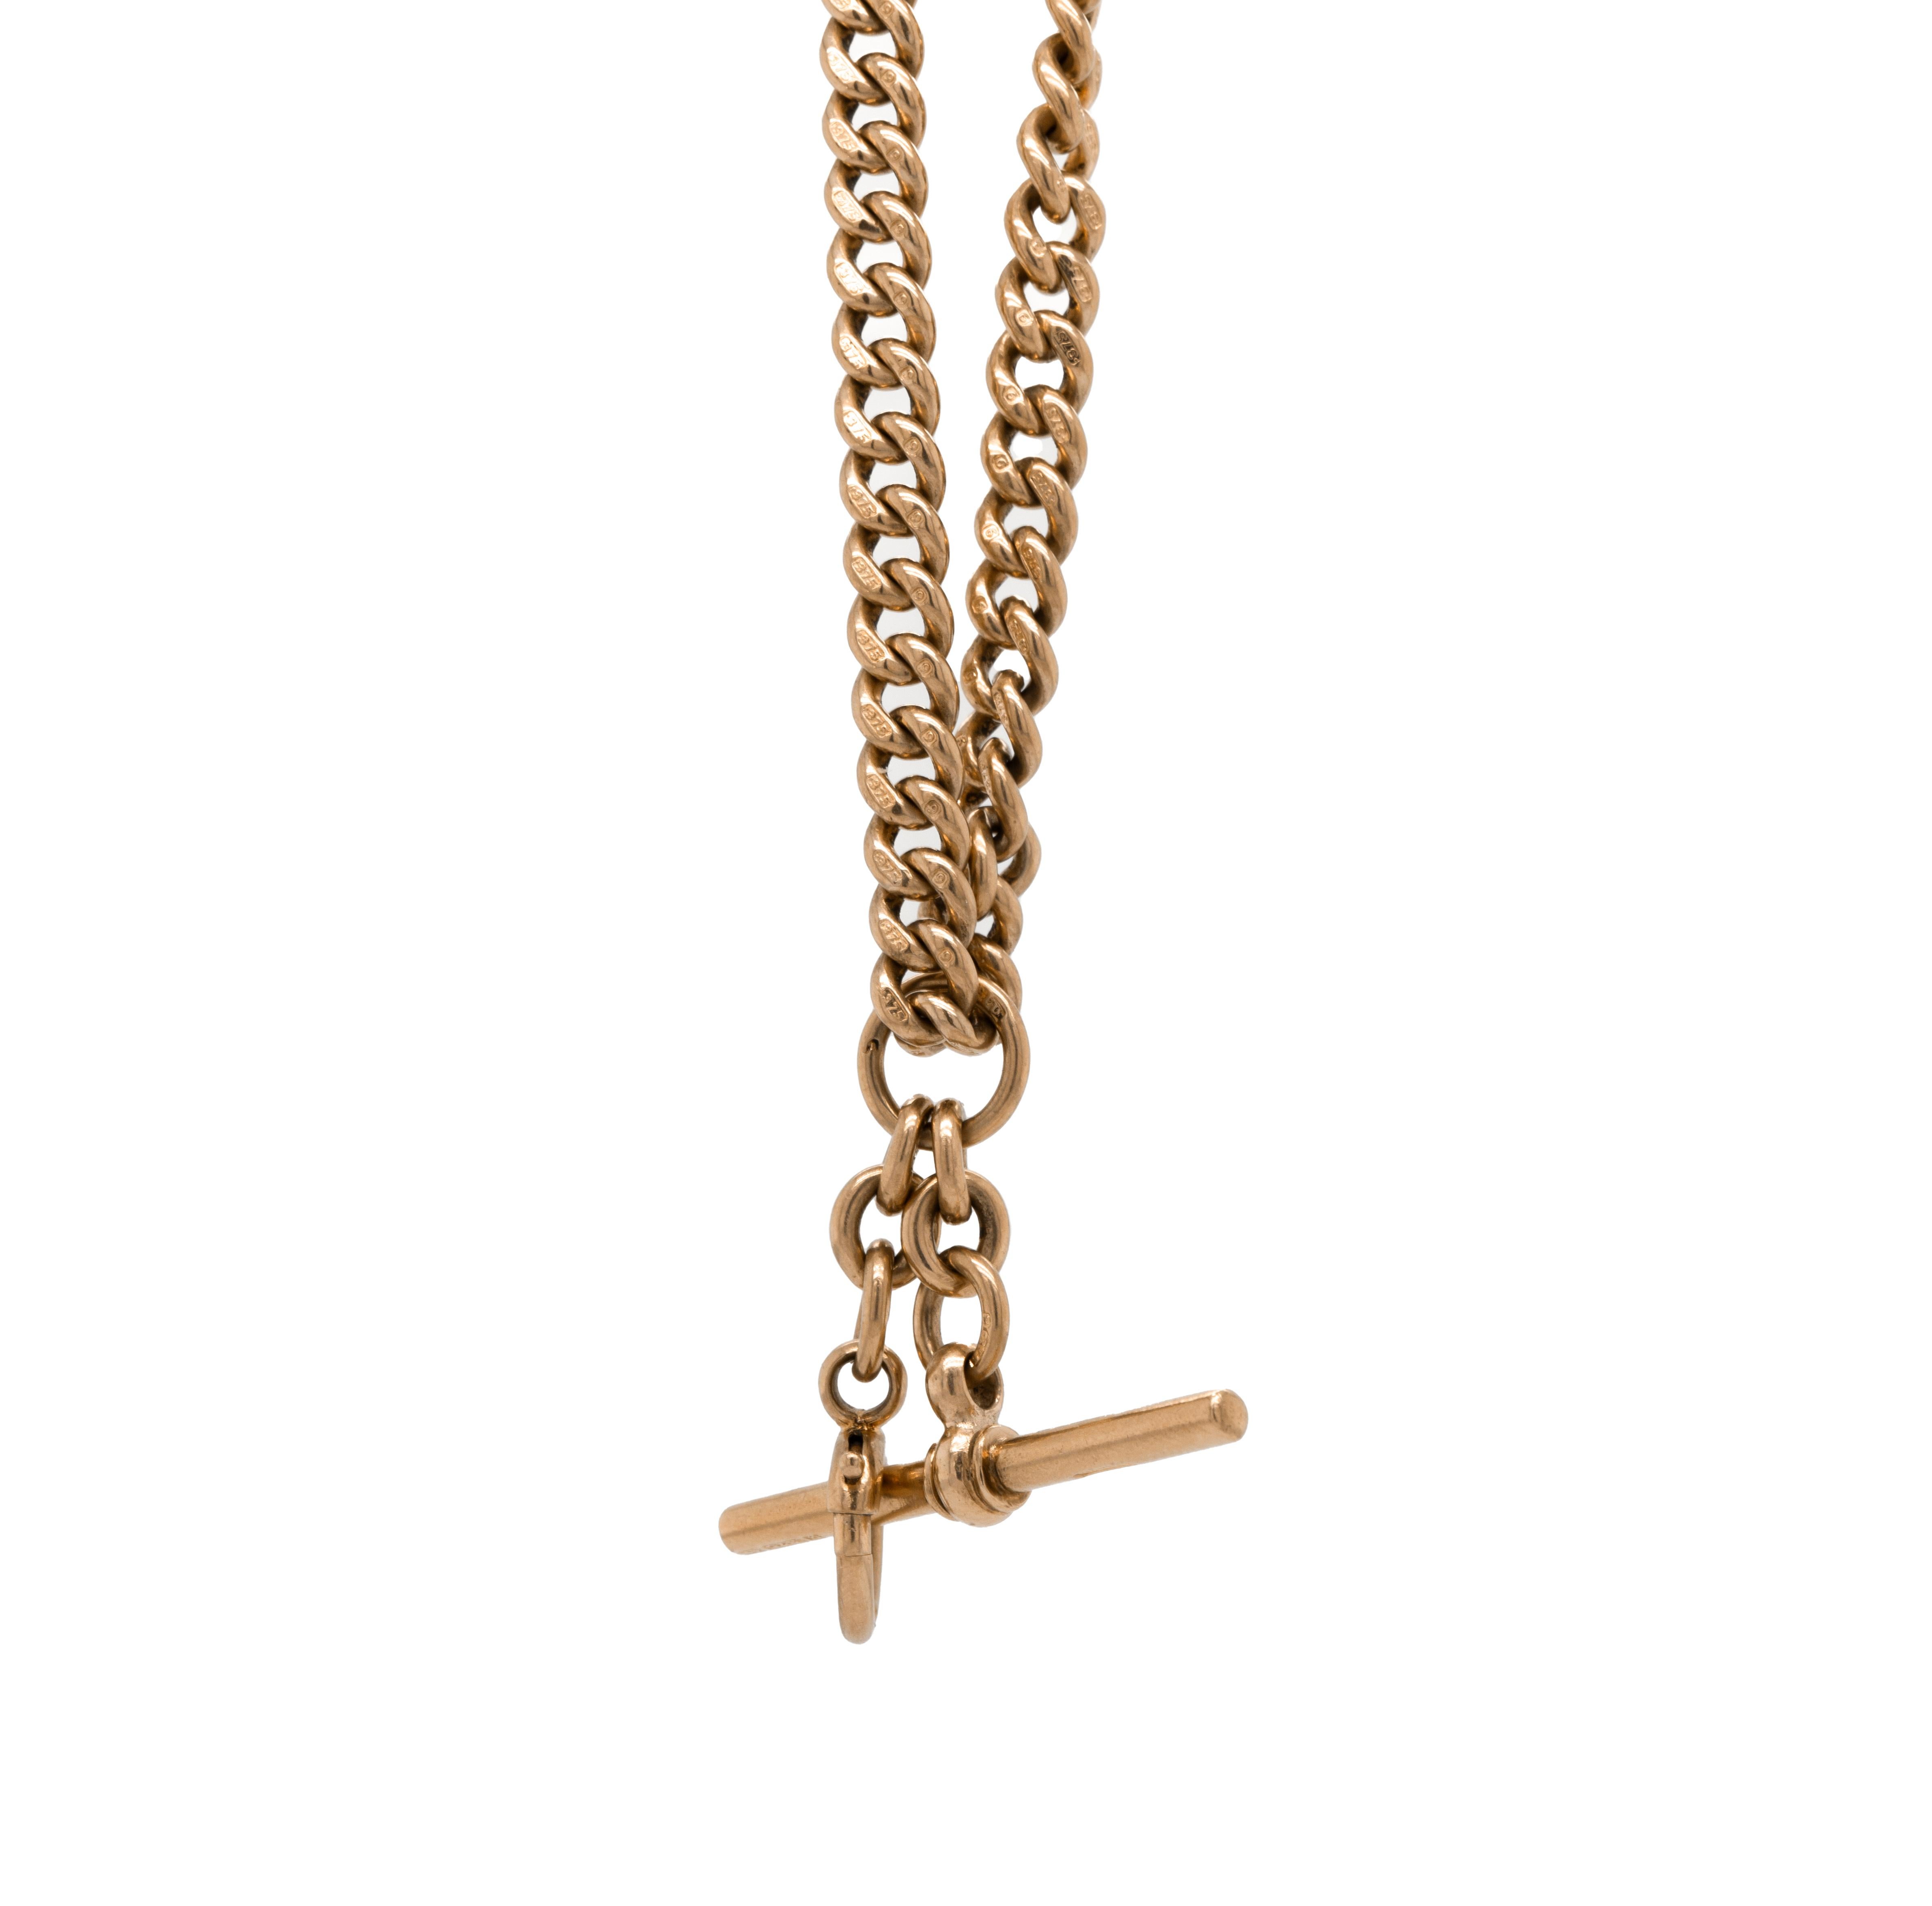 This beautiful 9ct rose gold antique Albert chain is in immaculate condition for a piece of this age, and these chains are increasingly rare.

Each link is meticulously stamped with the 9ct gold mark, and the chain fastens with two original lobsters